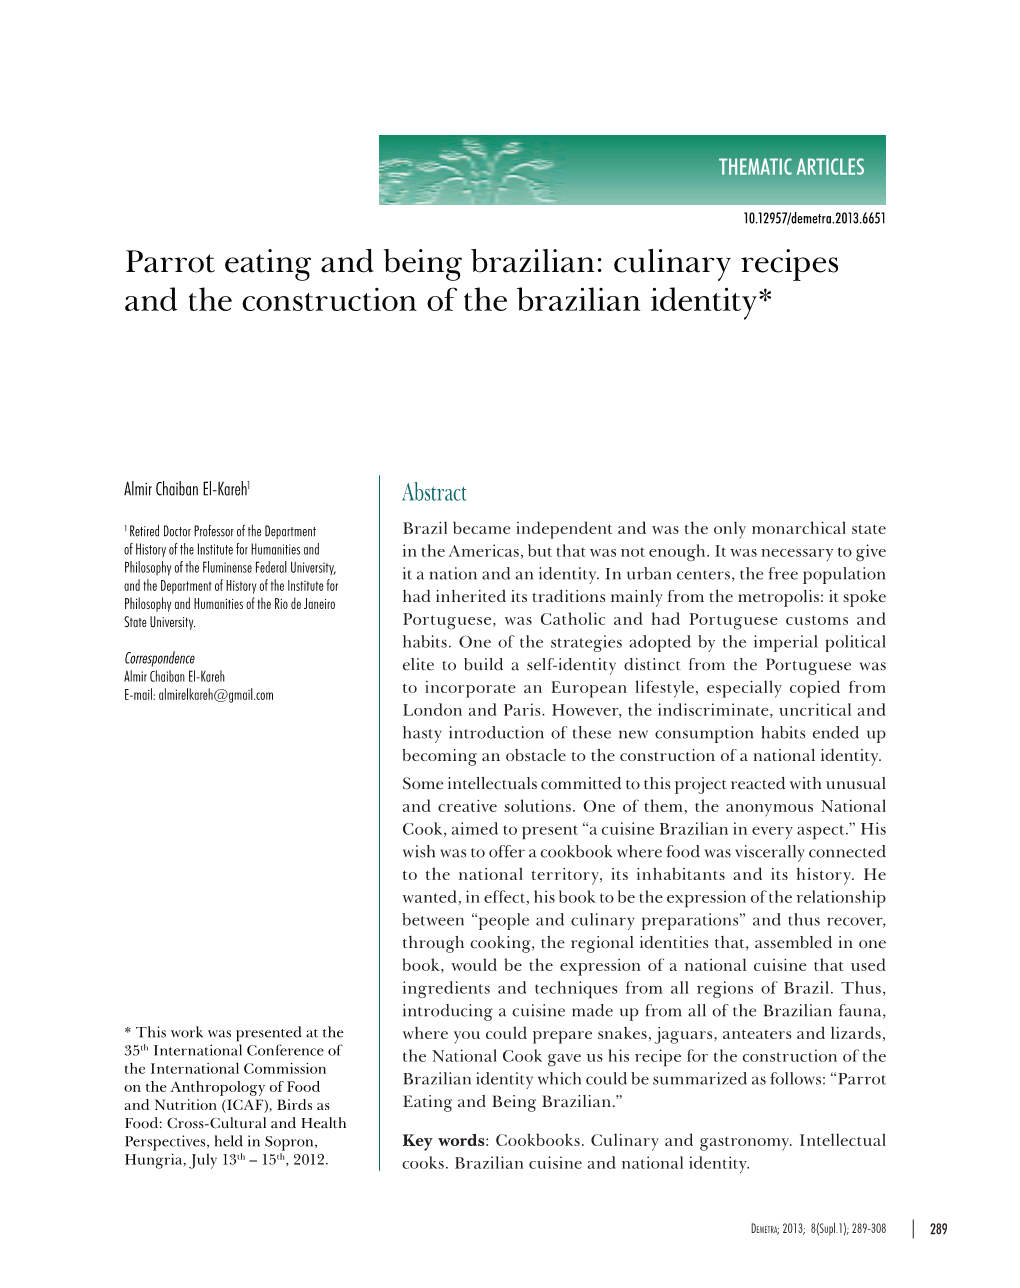 Parrot Eating and Being Brazilian: Culinary Recipes and the Construction of the Brazilian Identity*